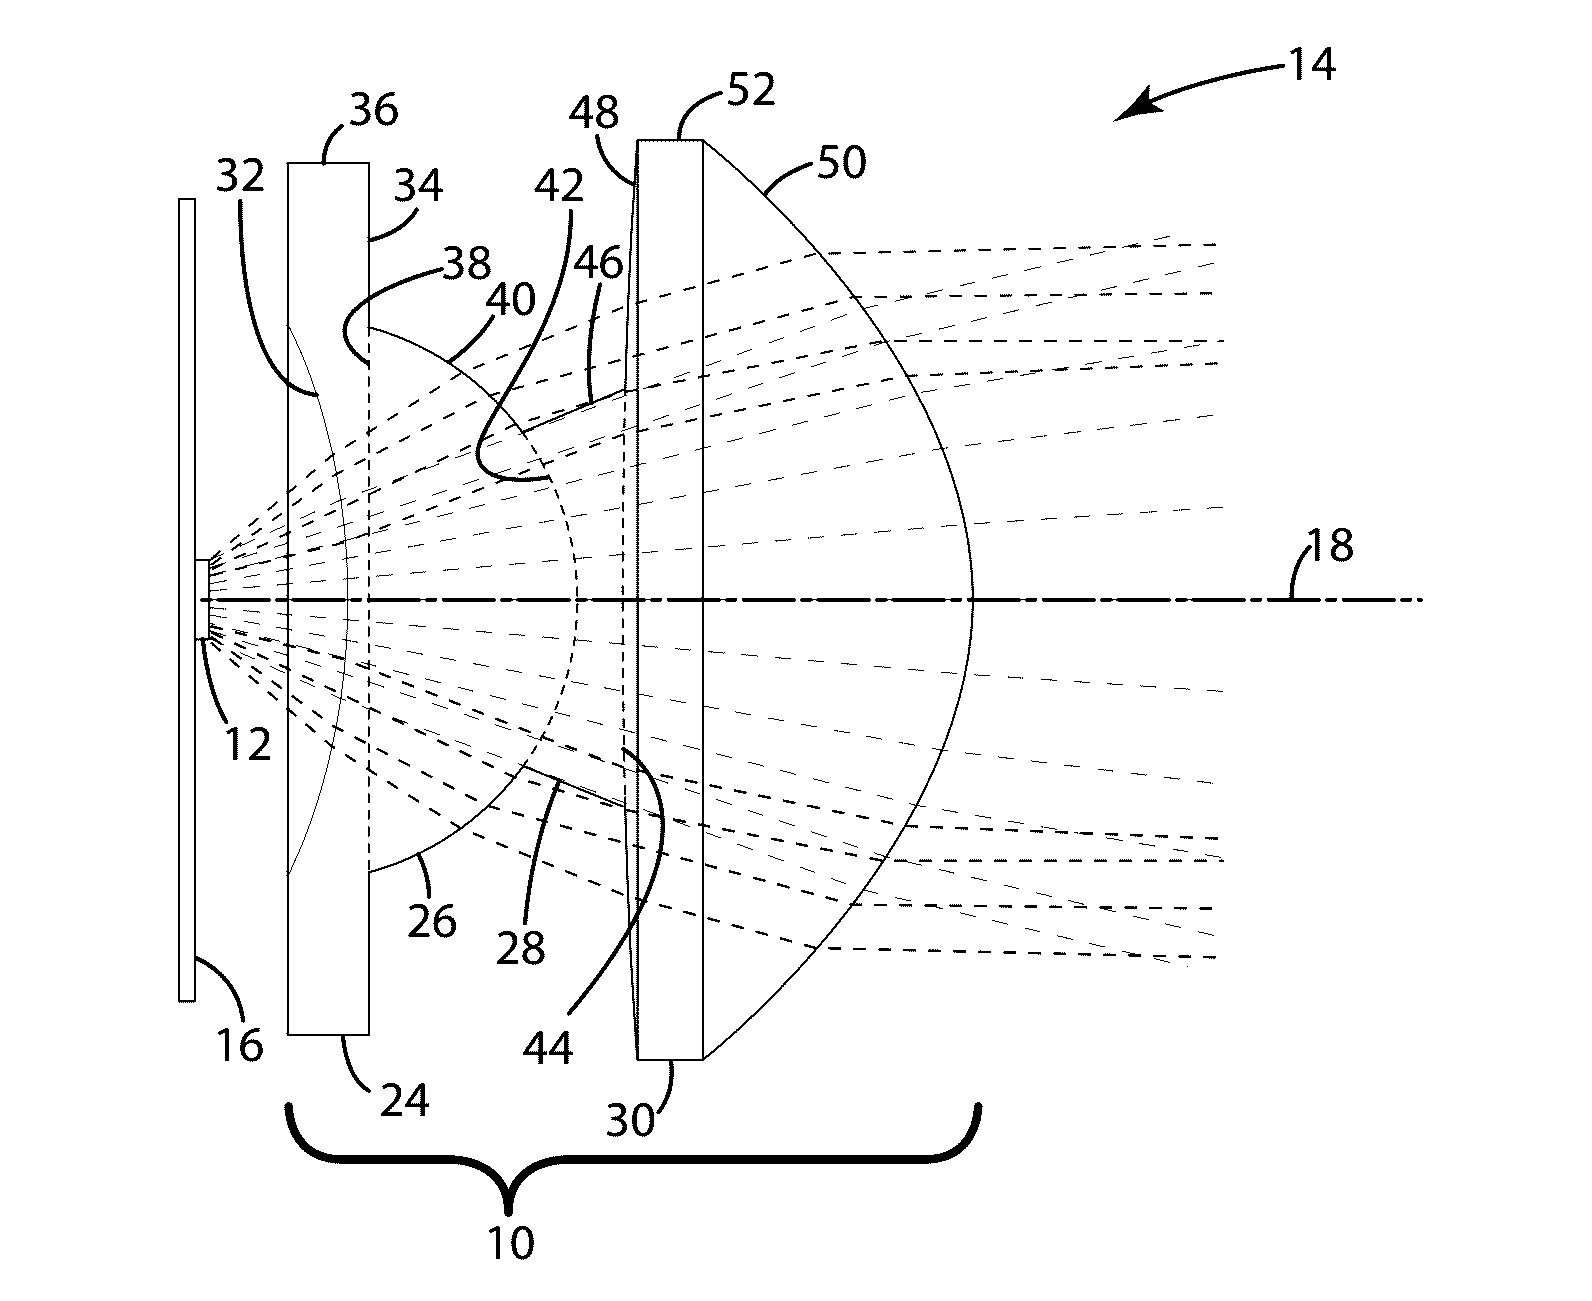 Compound lens for use with illumination sources in optical systems